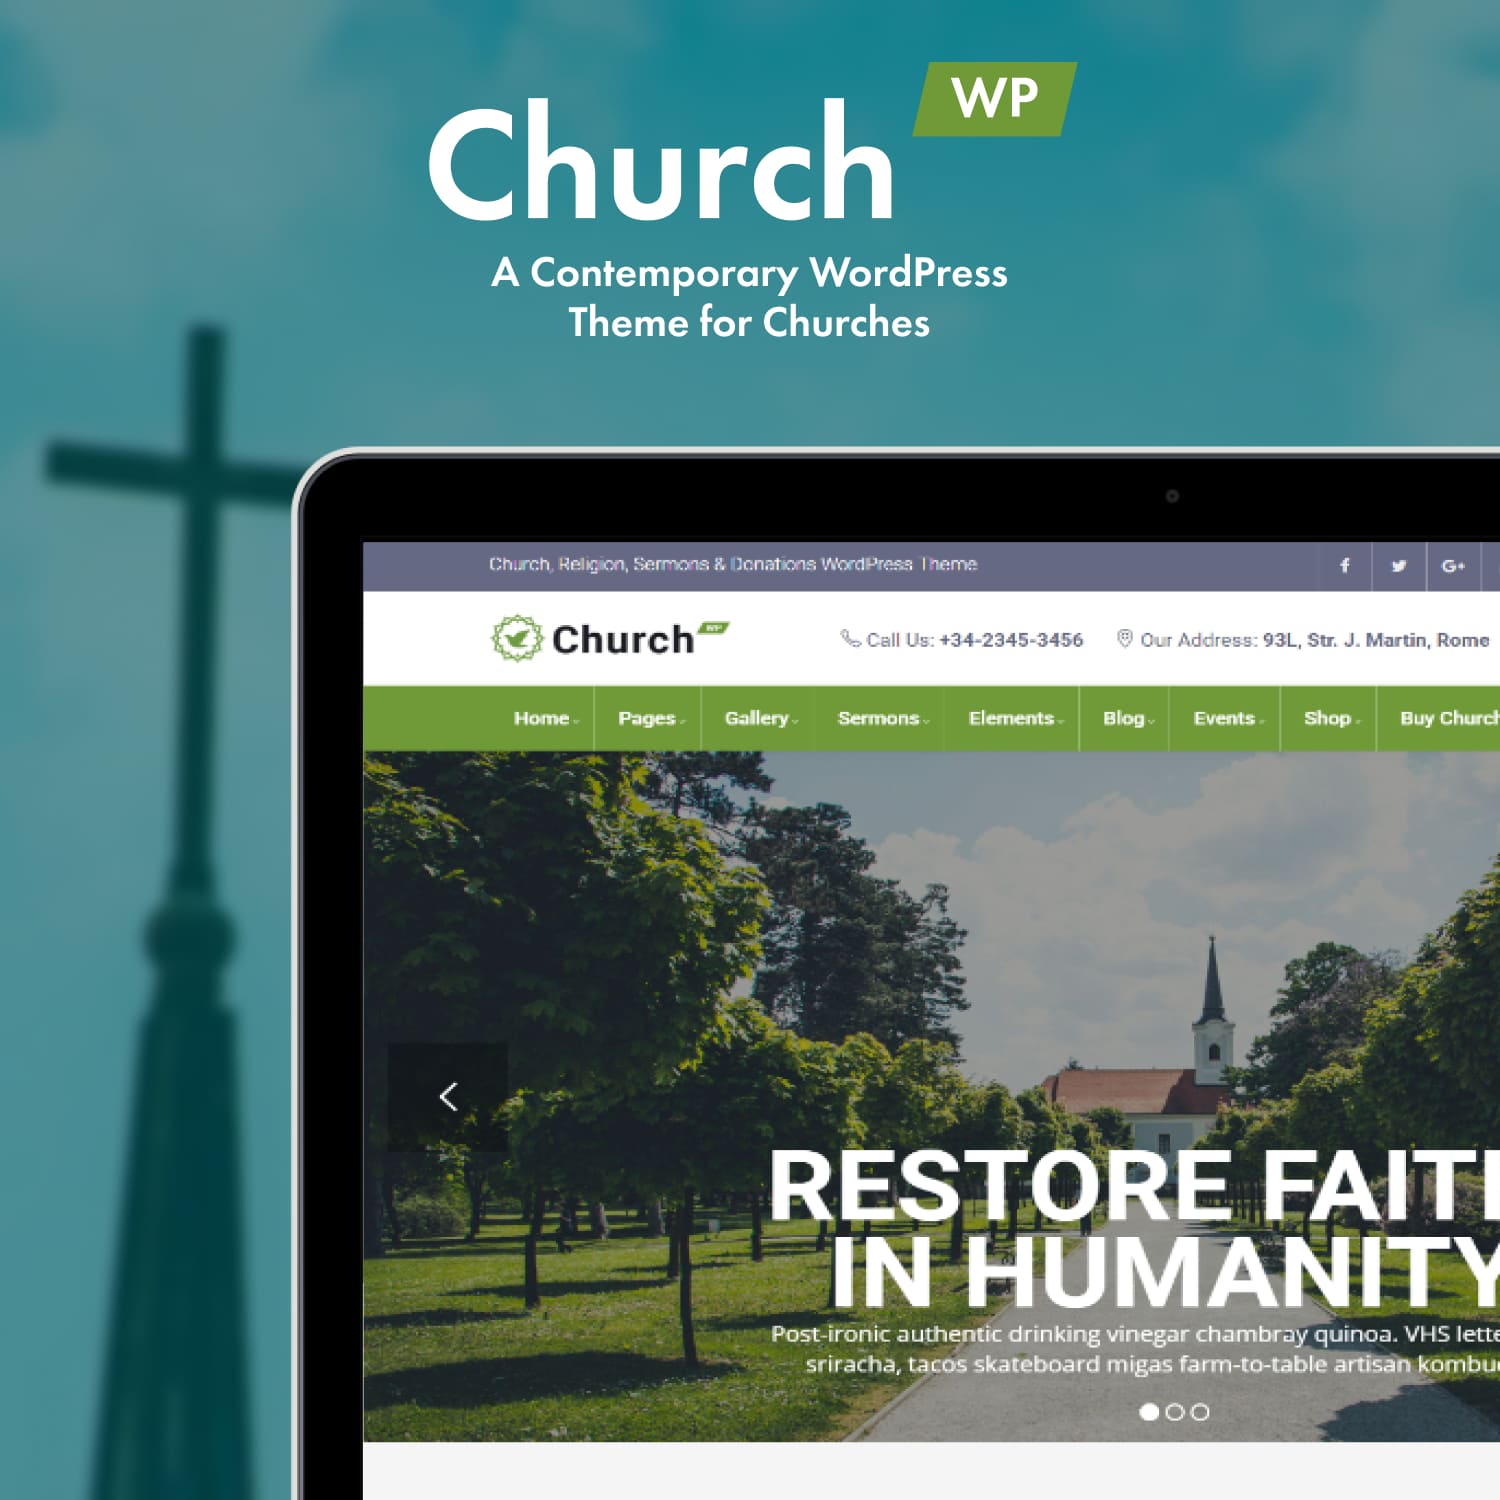 Preview Churchwp a contemporary wordpress theme for churches on the tablet.